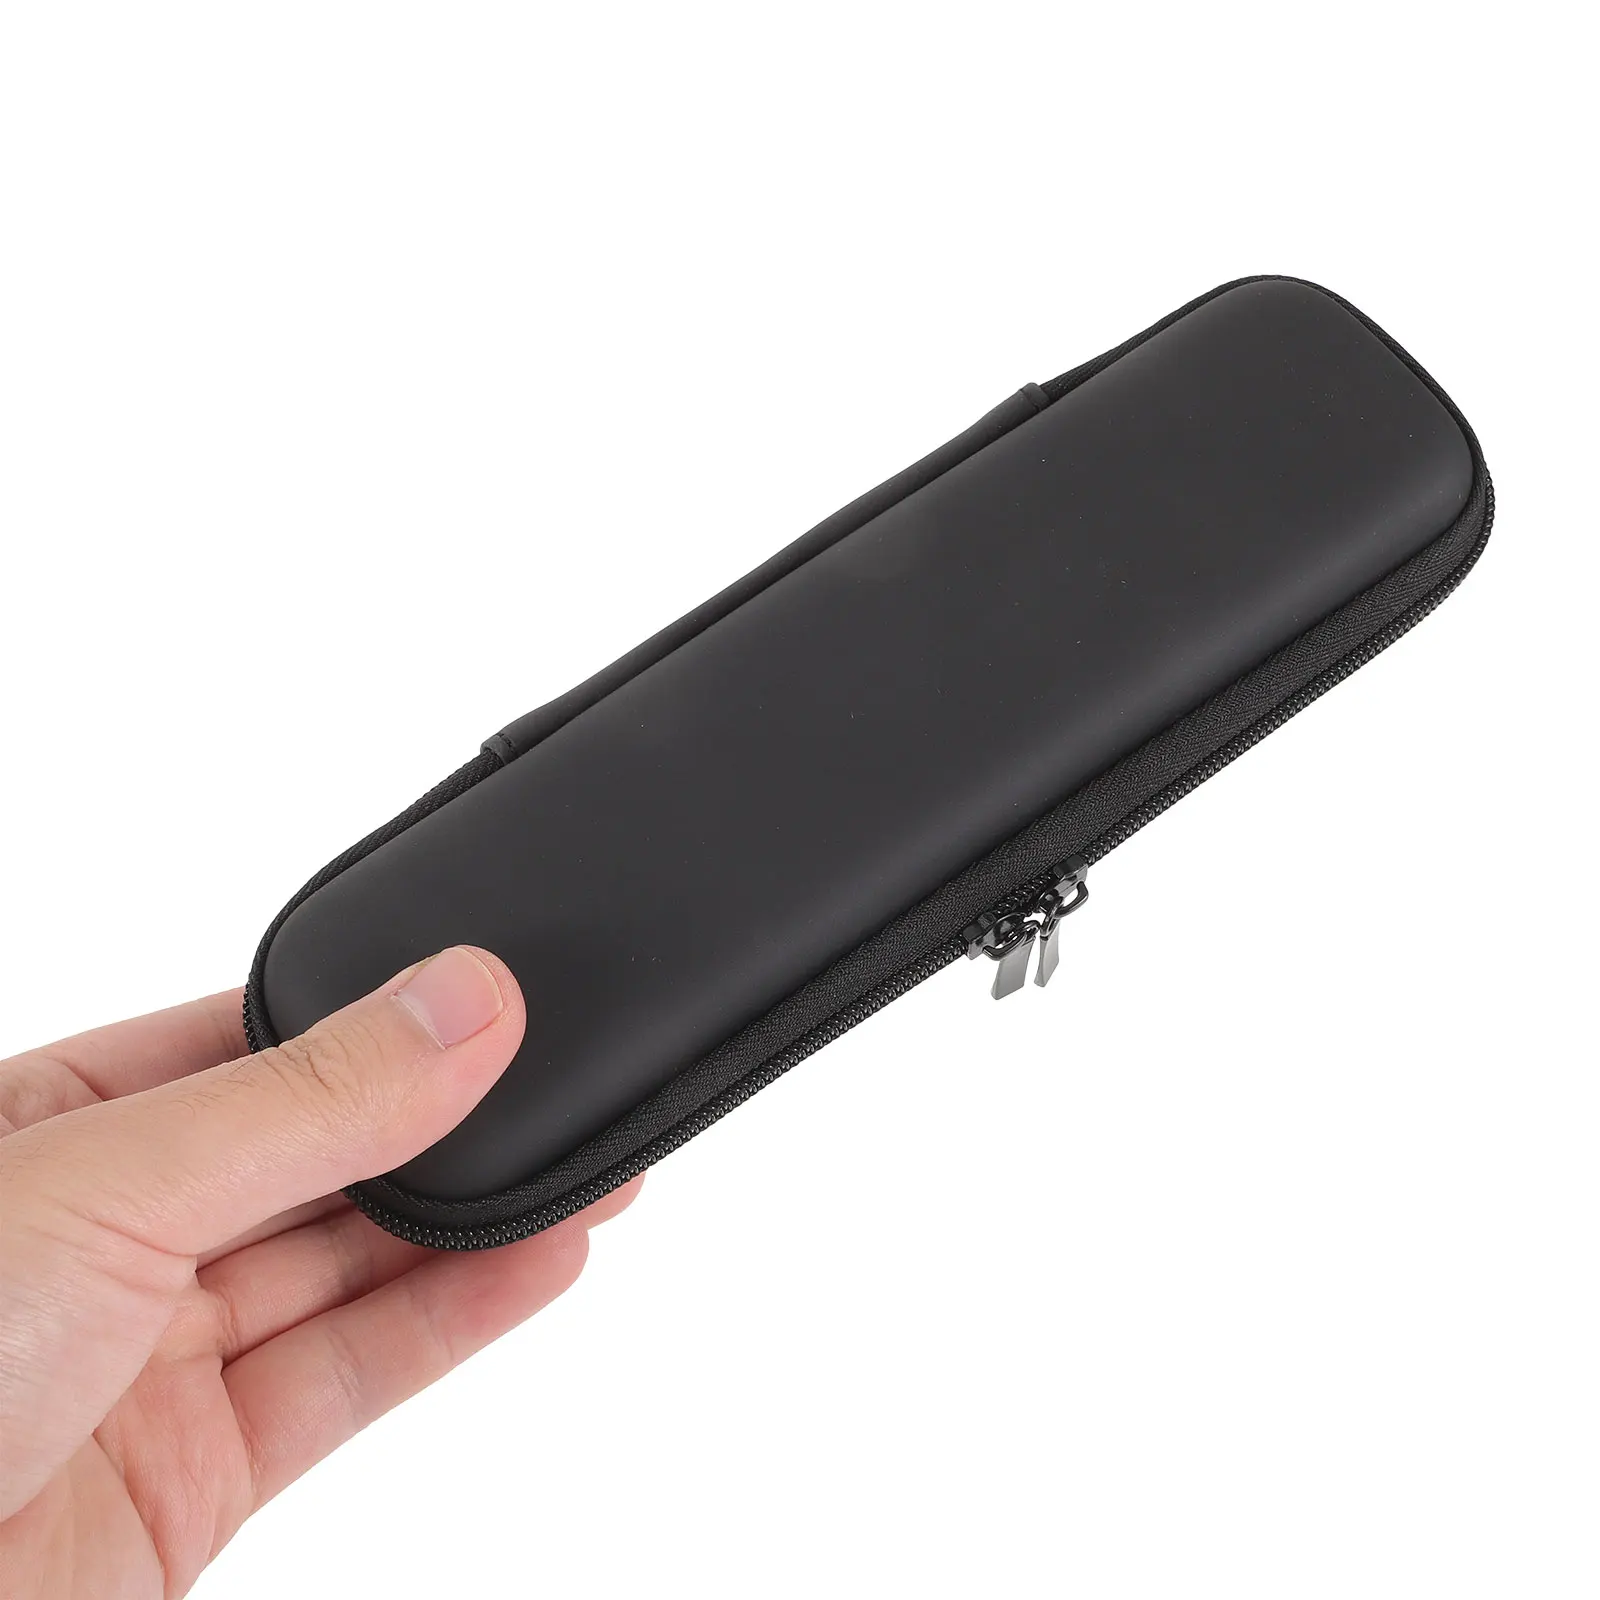 Bag Electric Travel Case Holder Bags Carrier Protective Portable Traveling Toothbrushes Outdoor Toothbrush Case Holder